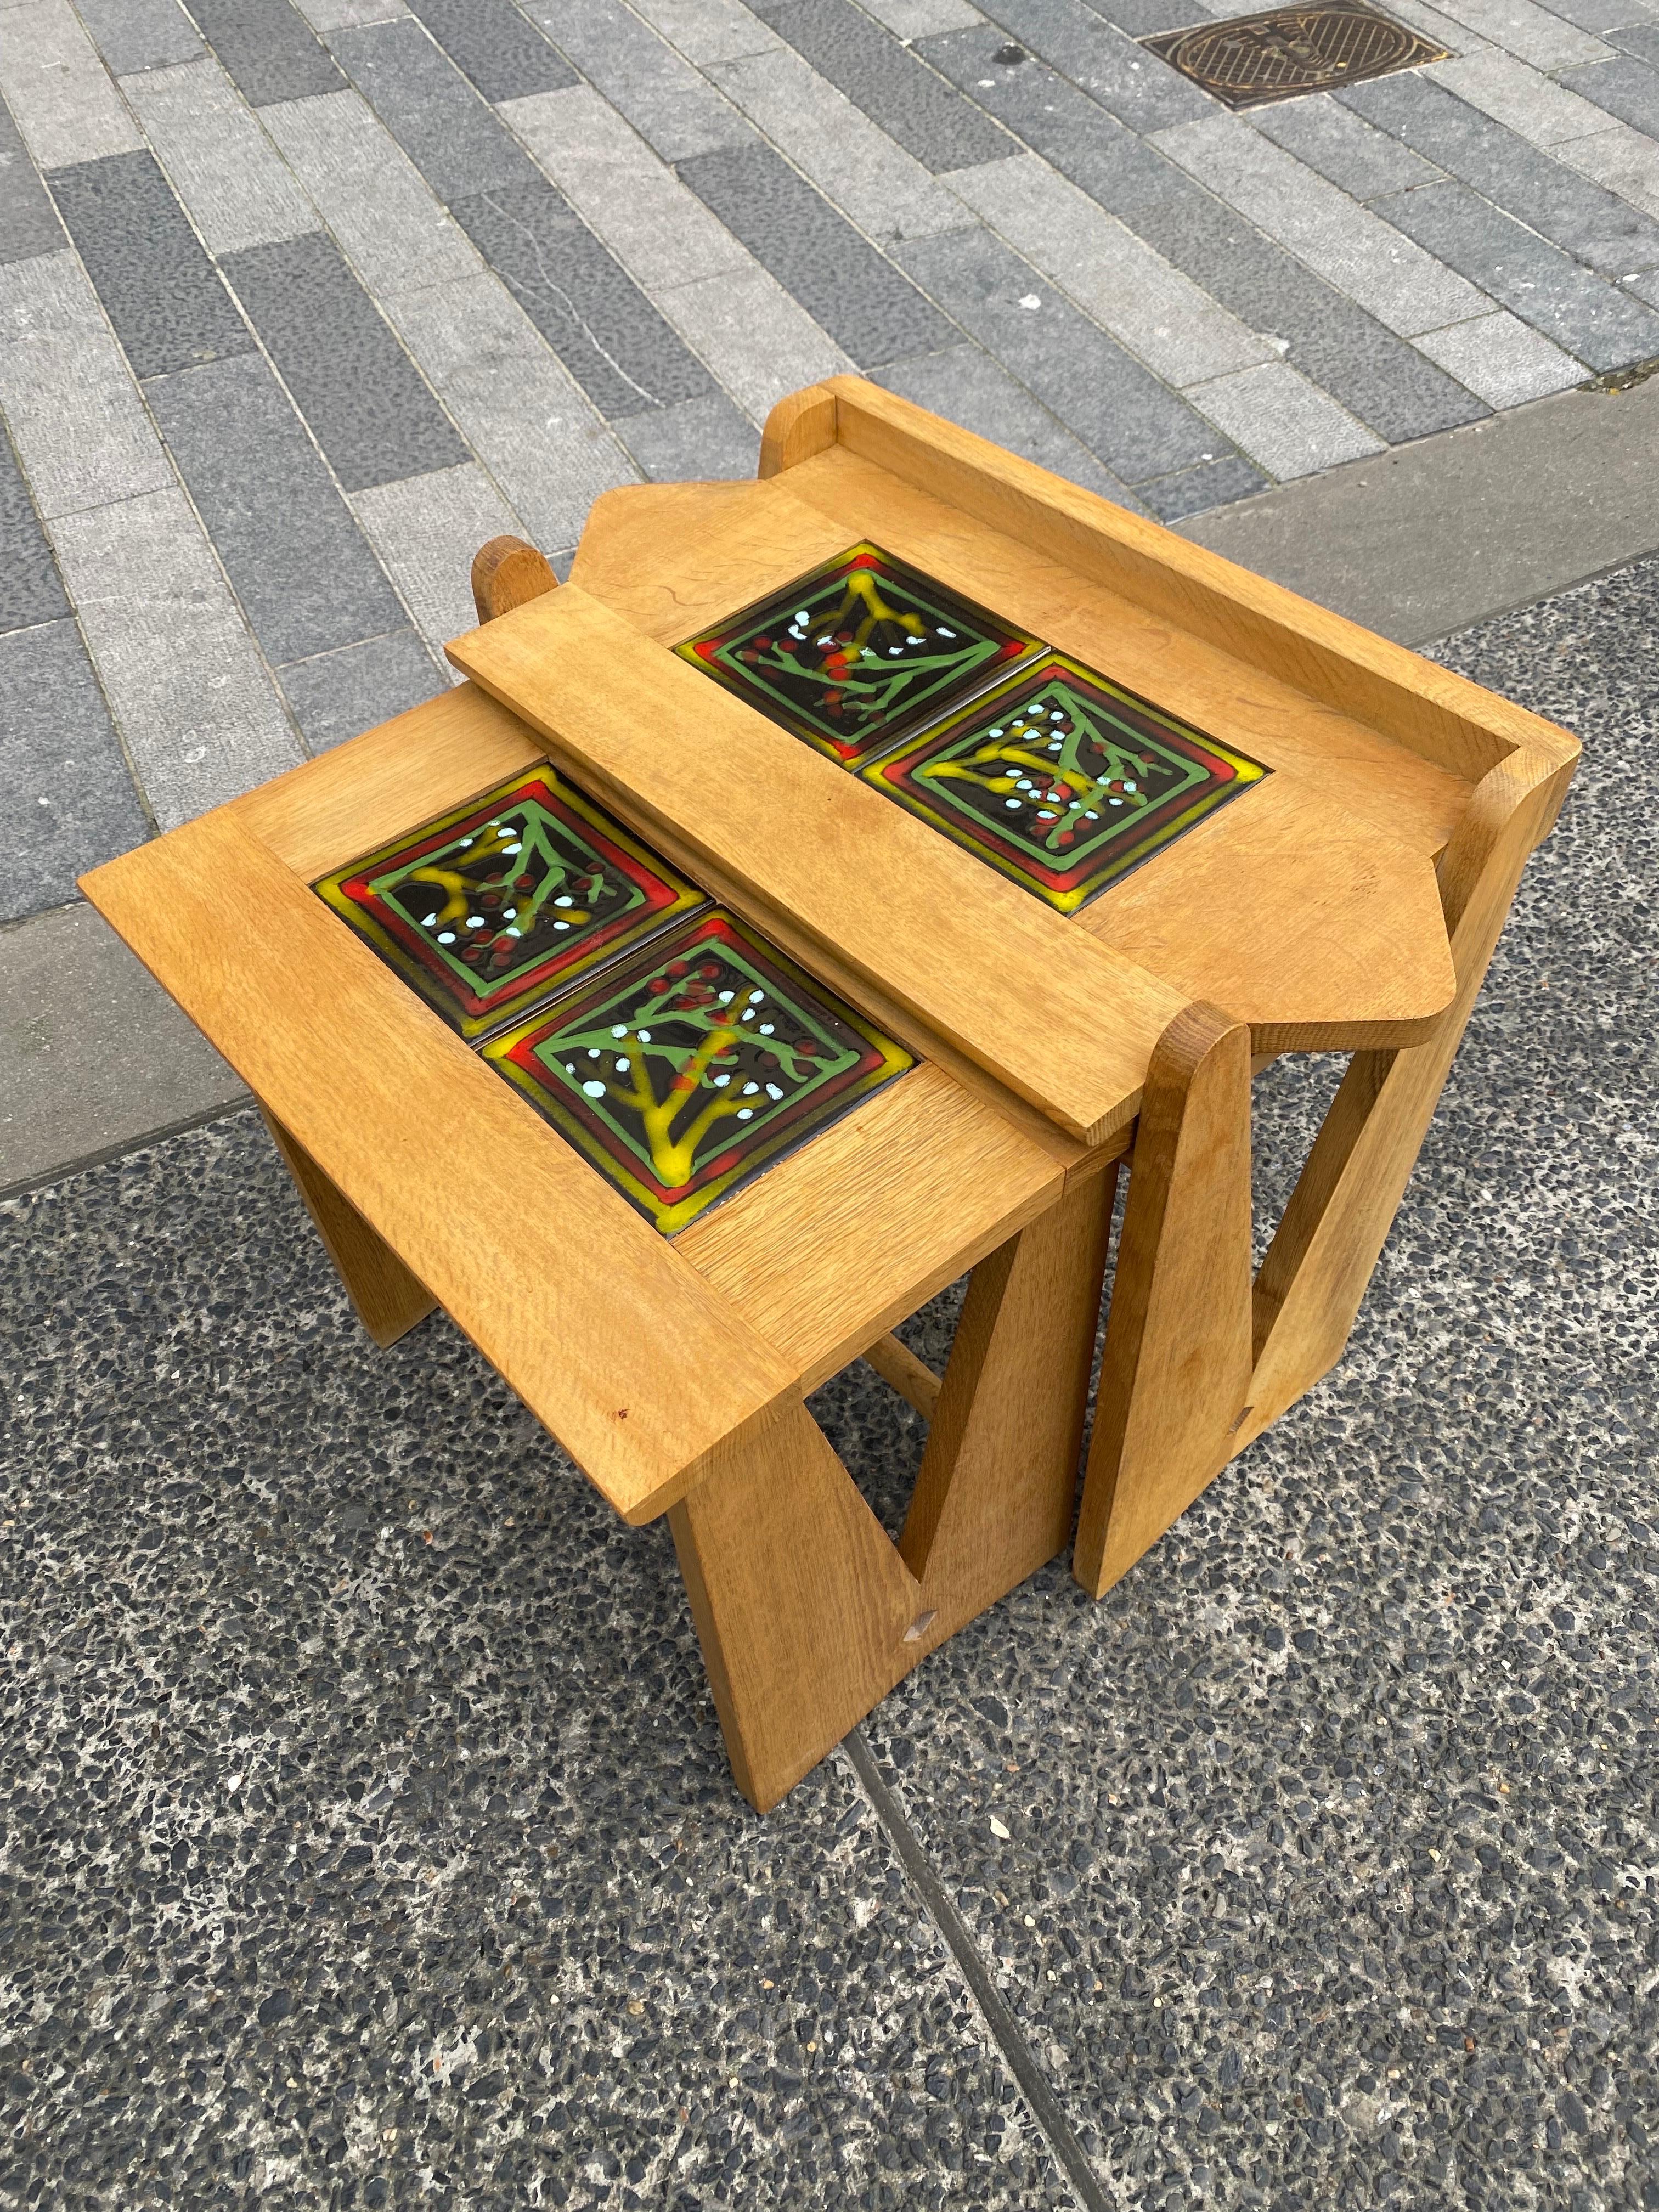 Ceramic Guillerme and Chambron, 2 Nesting Tables, Edition 